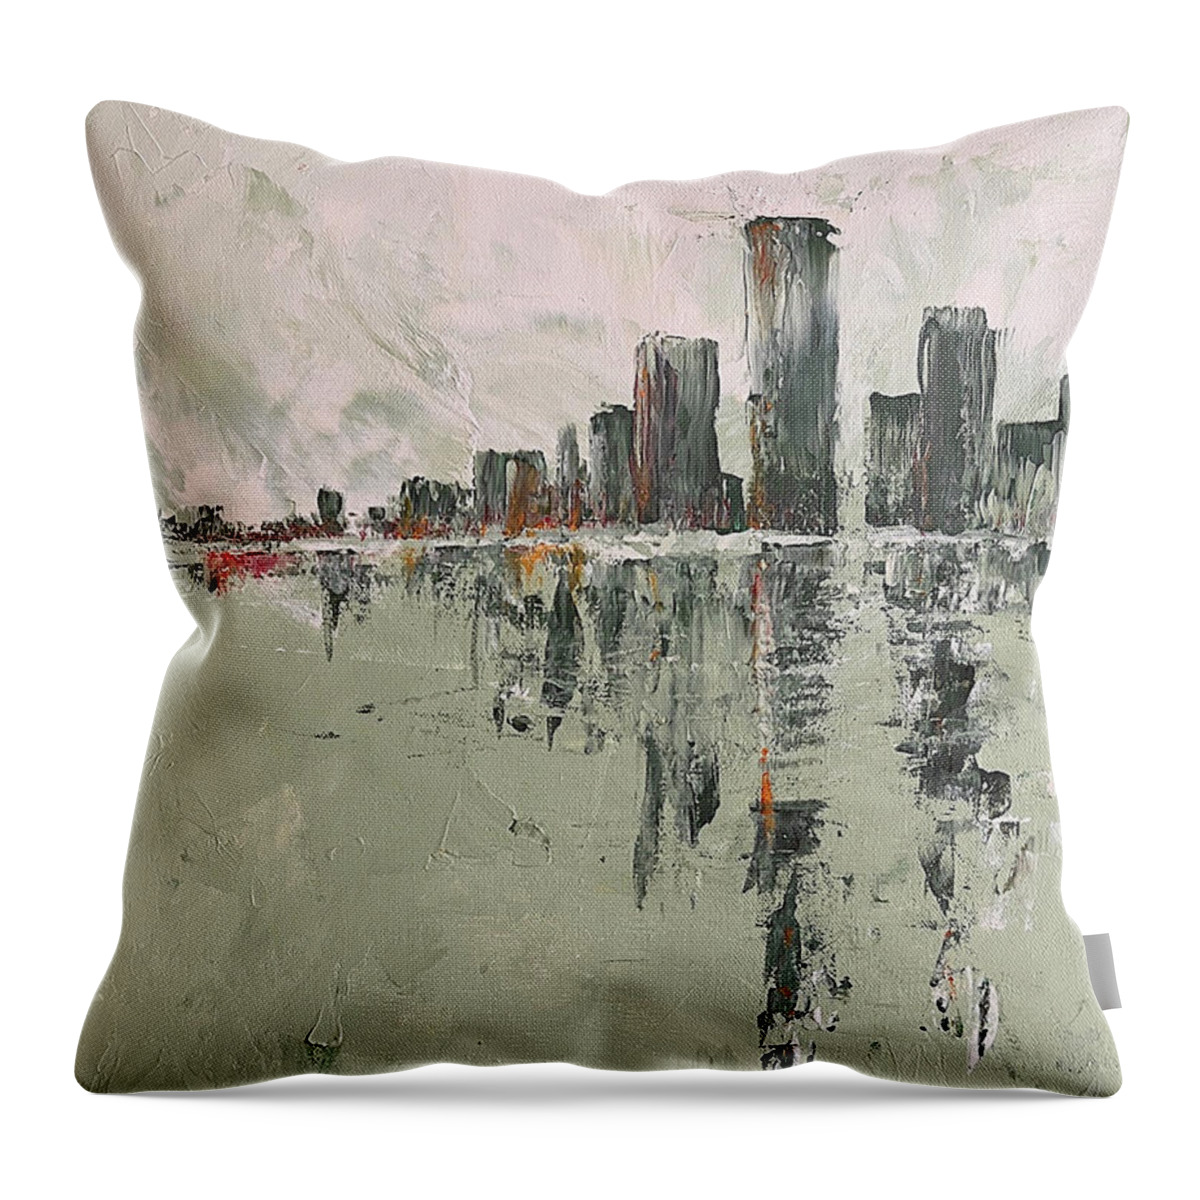 Abstract Throw Pillow featuring the painting Approaching by Tes Scholtz